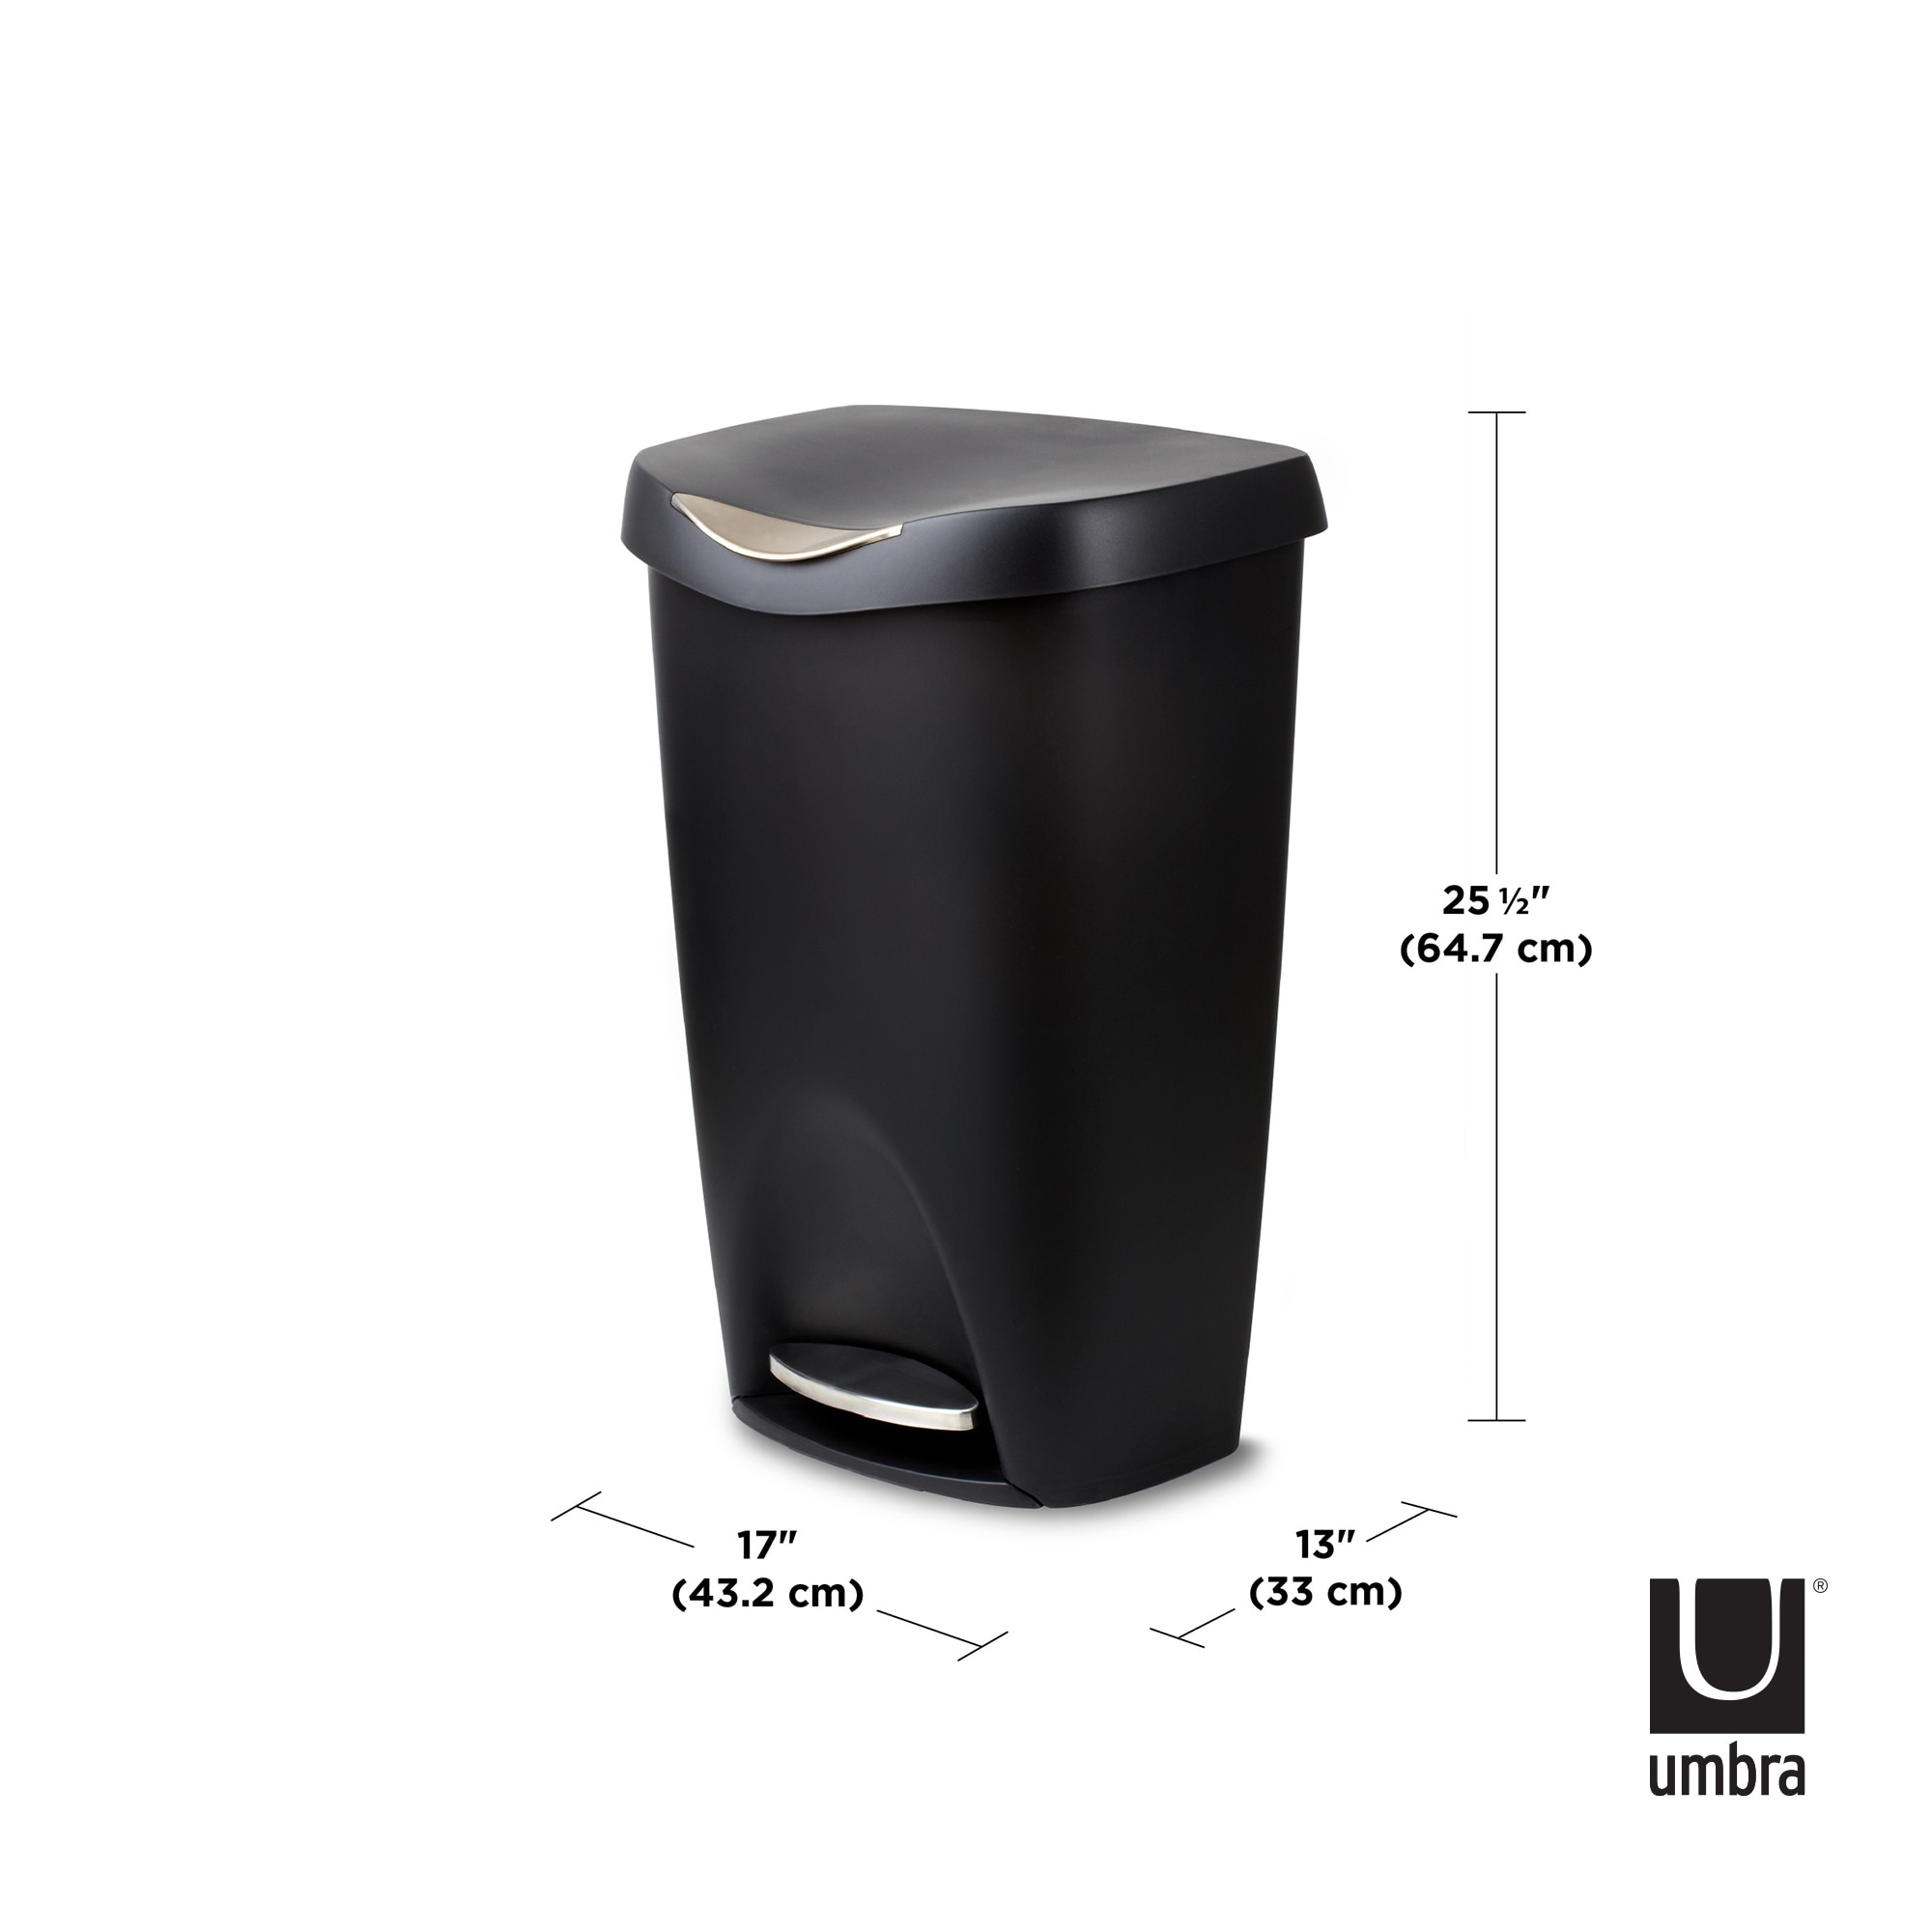 https://ak1.ostkcdn.com/images/products/is/images/direct/ac85457936b9237747026fa9b1e99751d0049256/Umbra-Brim-Large-13-Gallon-Trash-Can-with-Foot-Pedal-and-Lid.jpg